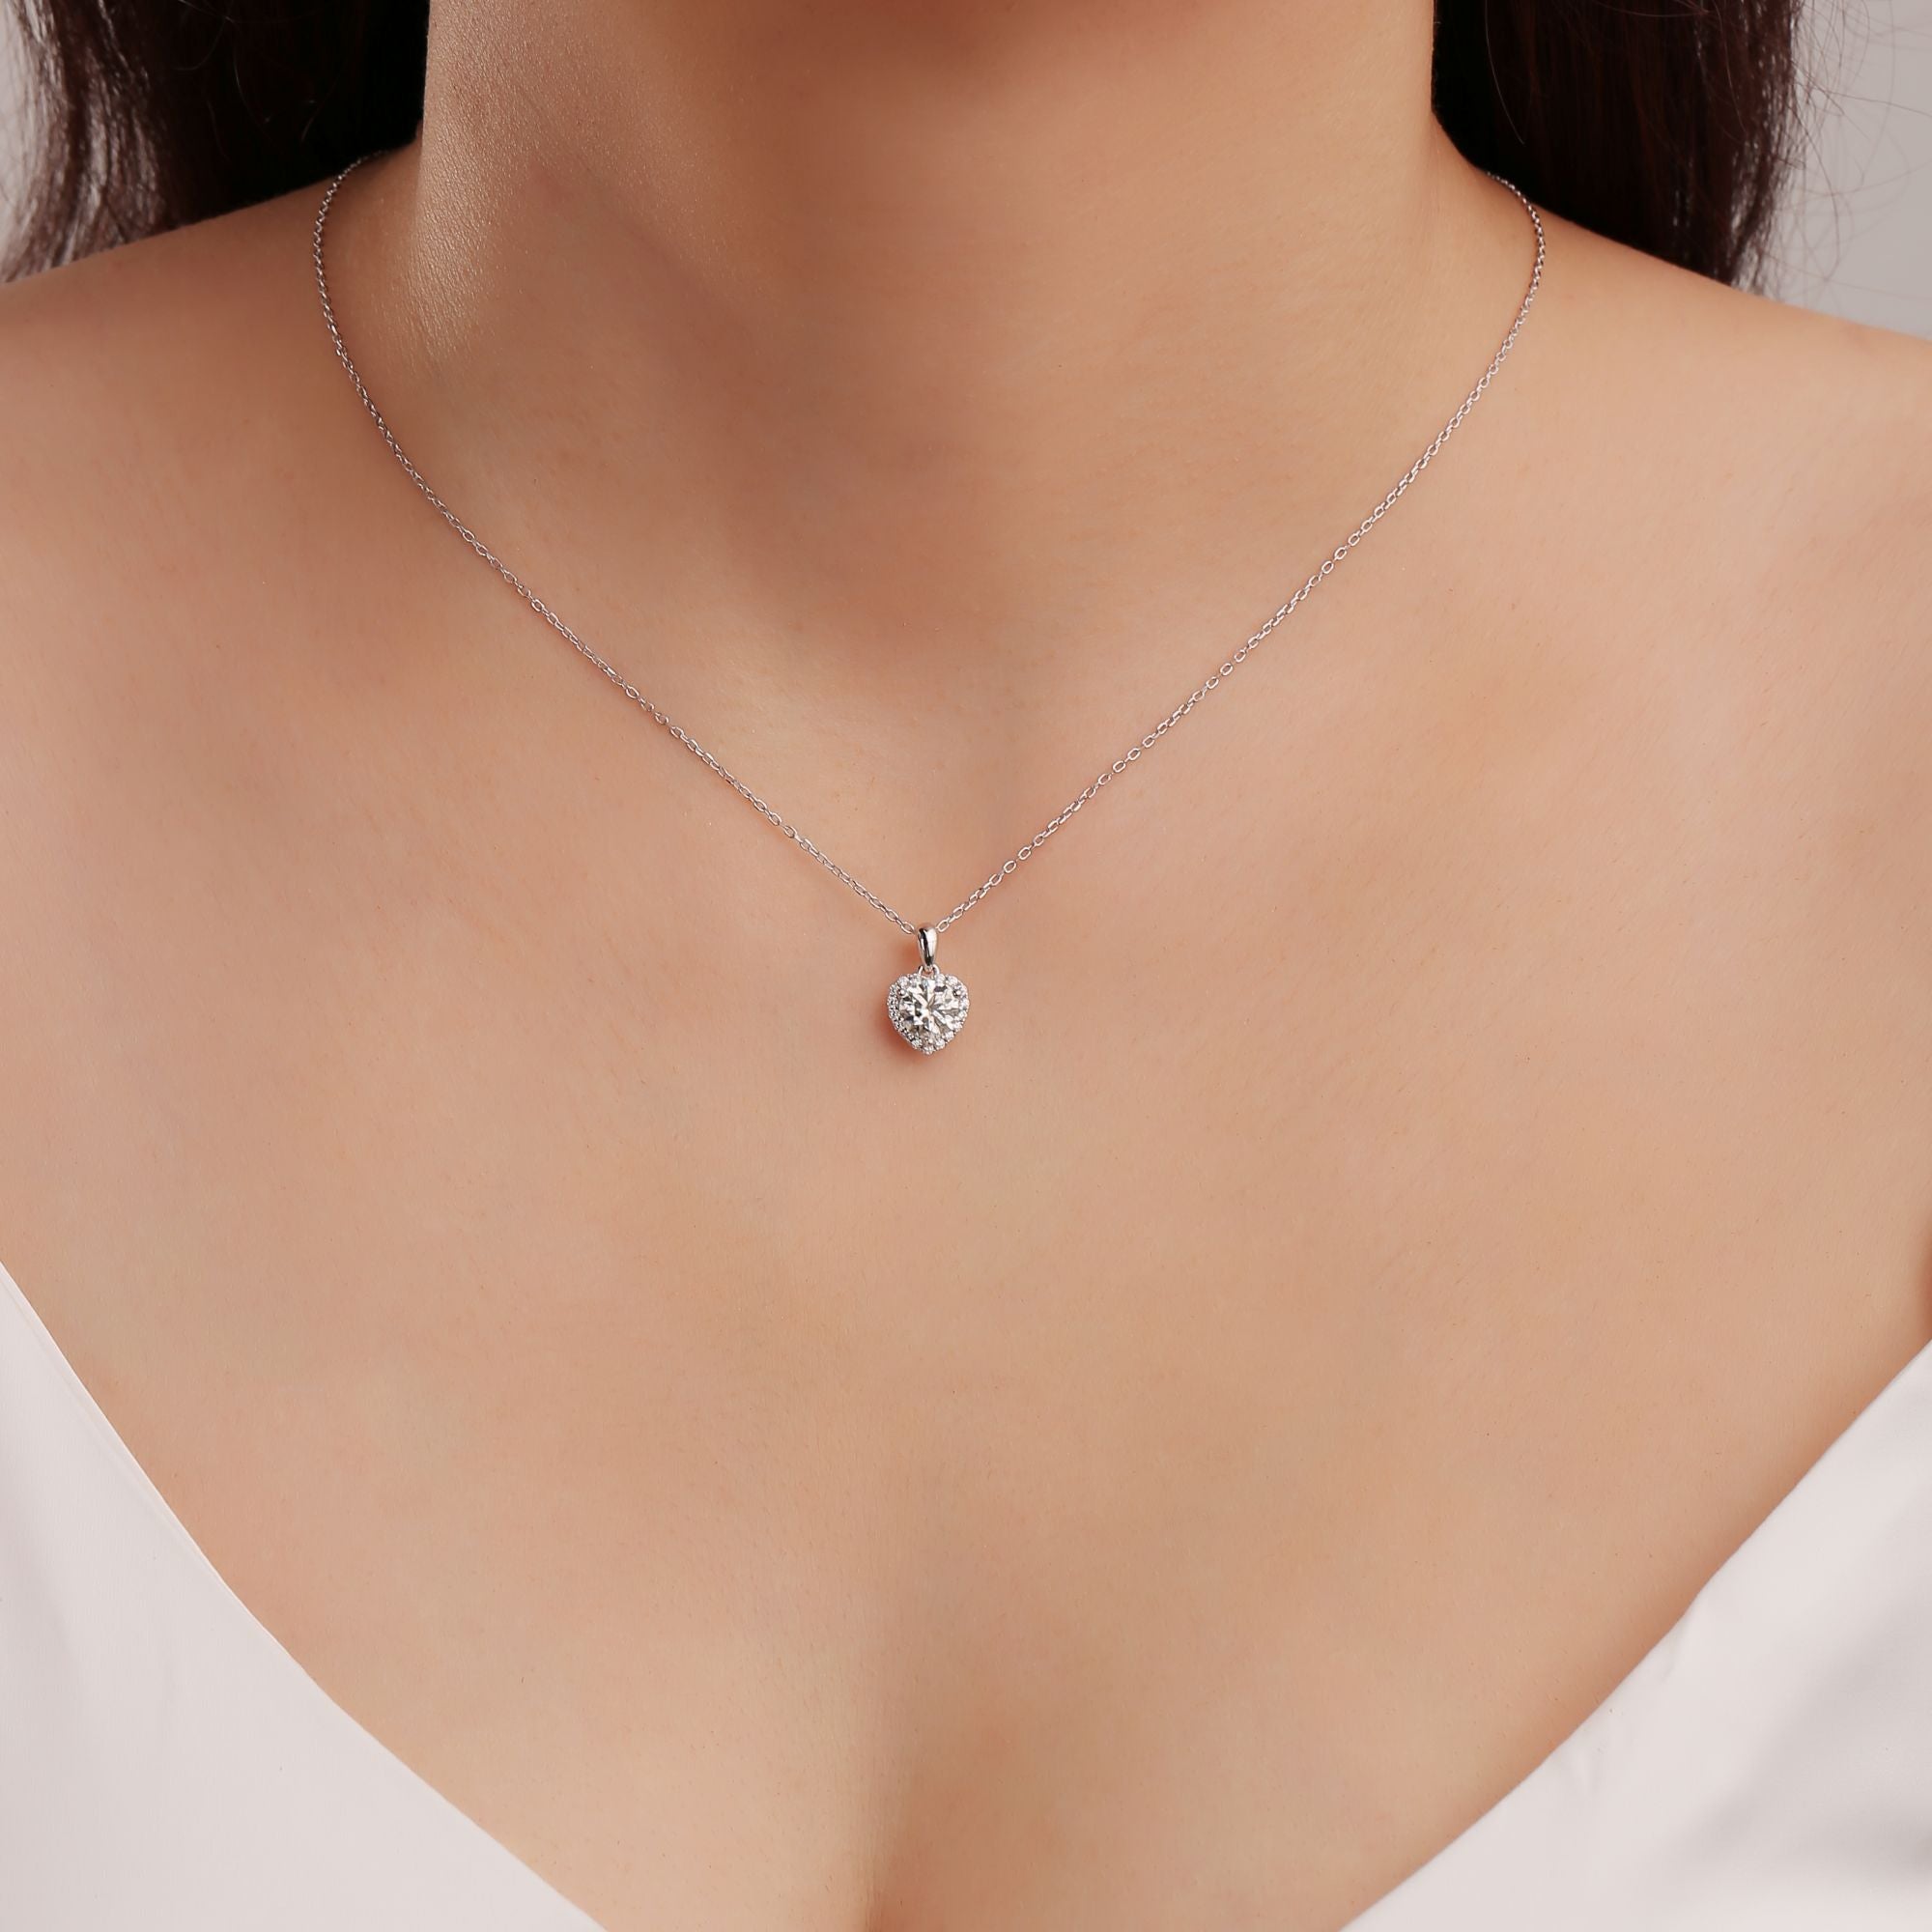 1 CT. Heart Love Halo Moissanite Necklace